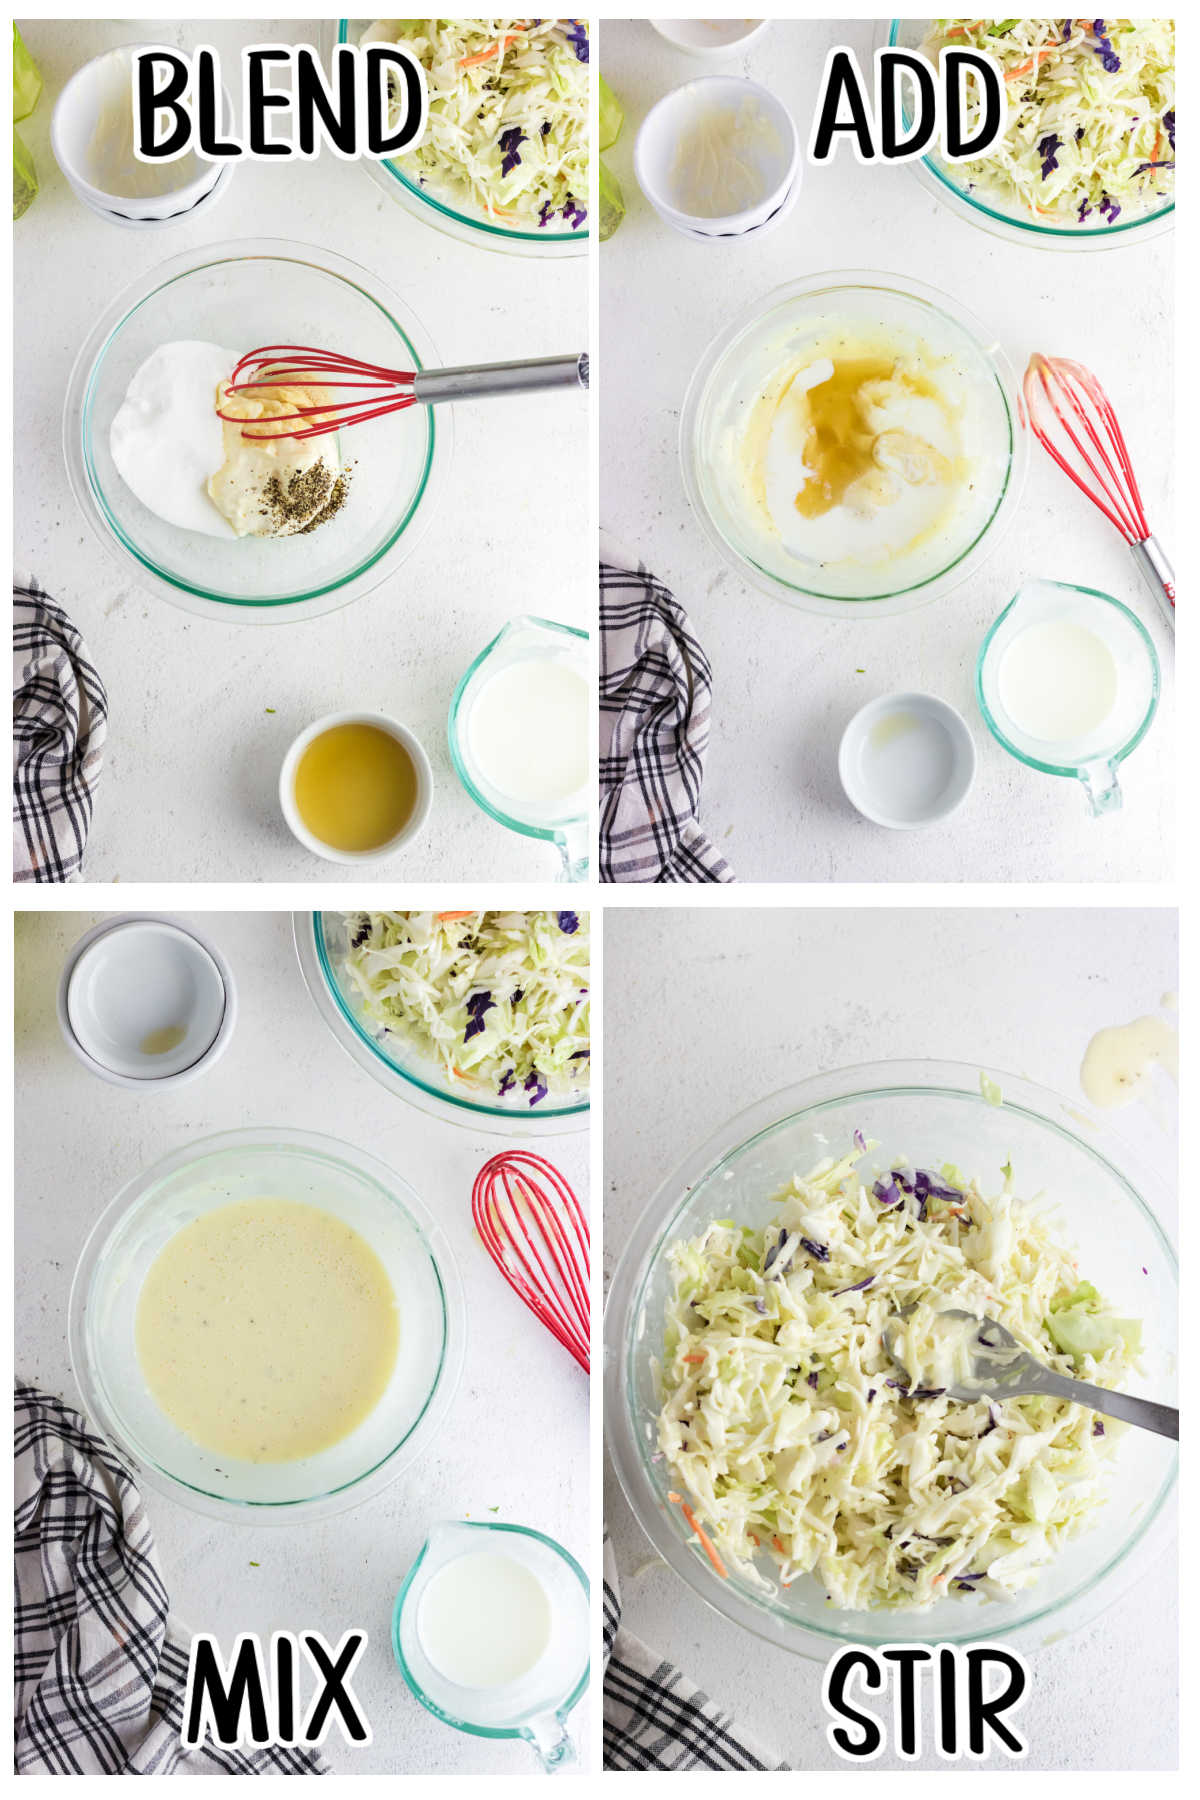 Step by step images showing how to make coleslaw.